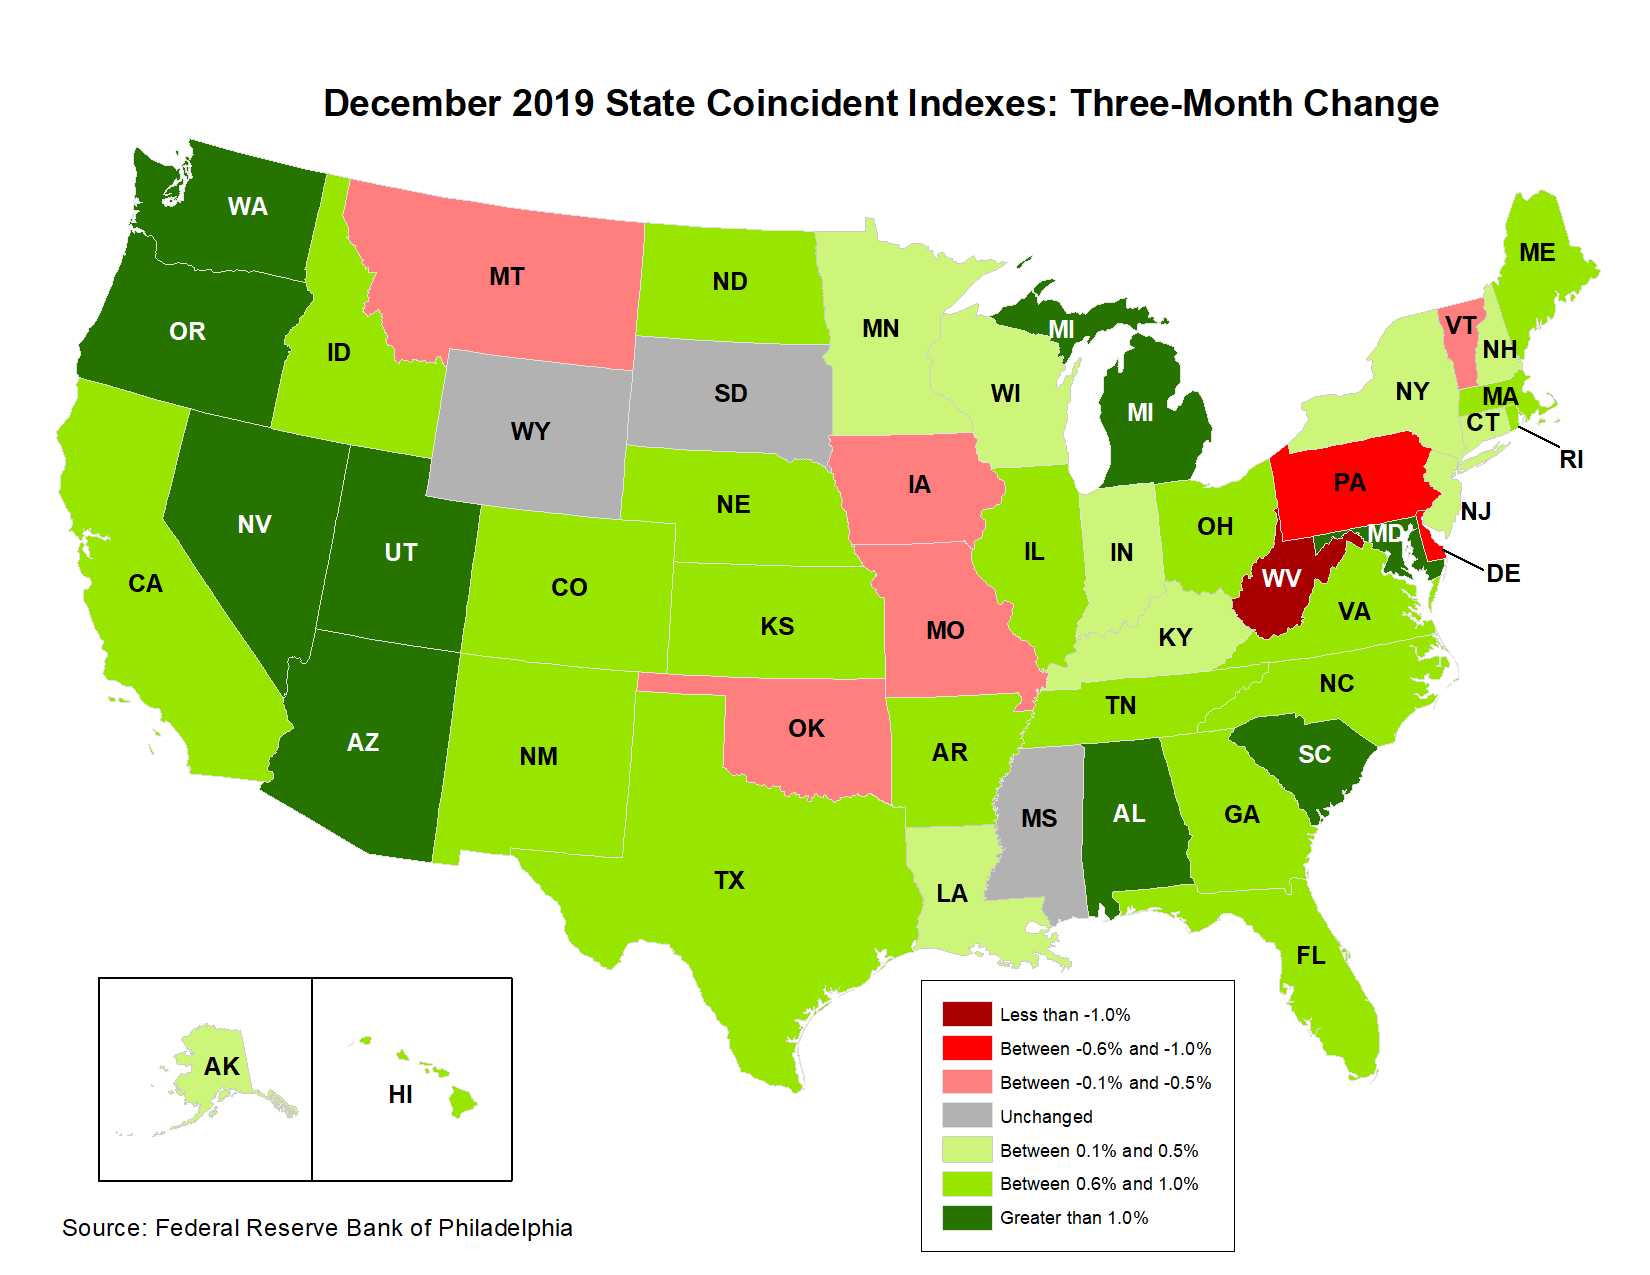 Map of the U.S. showing the State Coincident Indexes Three-Month Change in December 2019